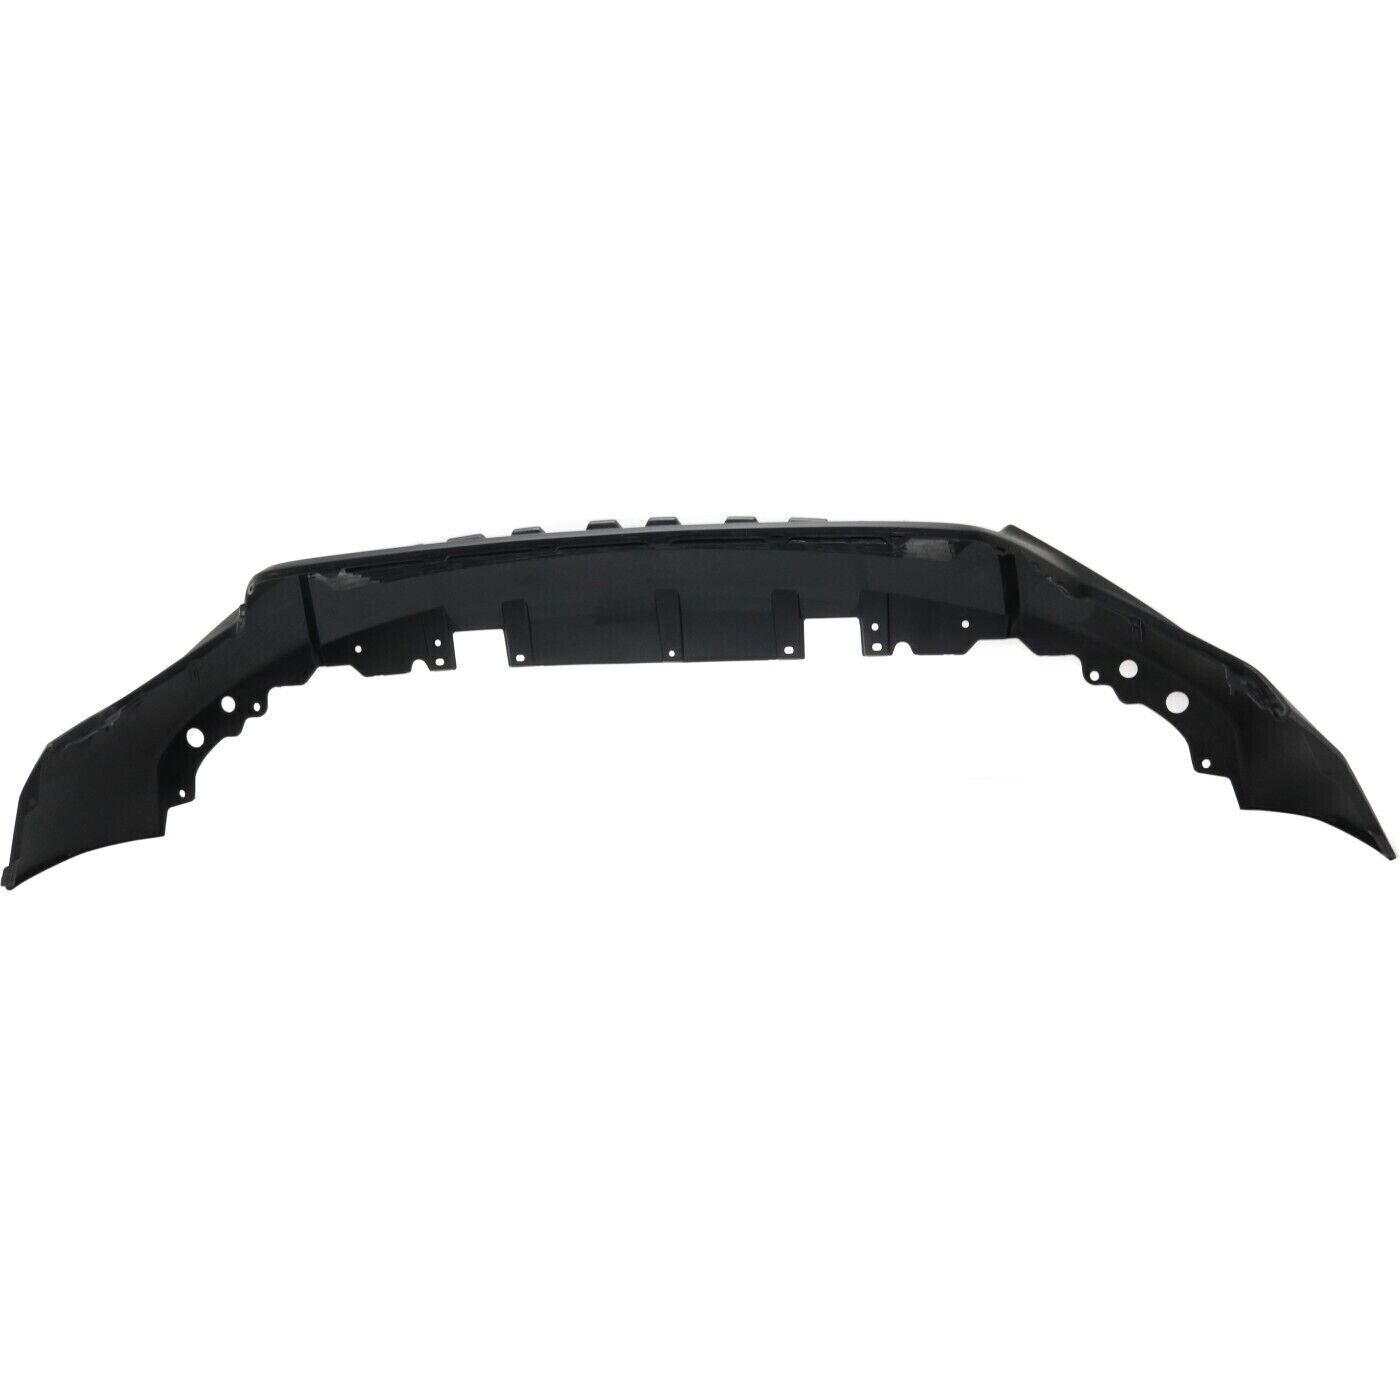 2017-2019 HONDA CR-V; Front Bumper Cover lower; Painted to Match